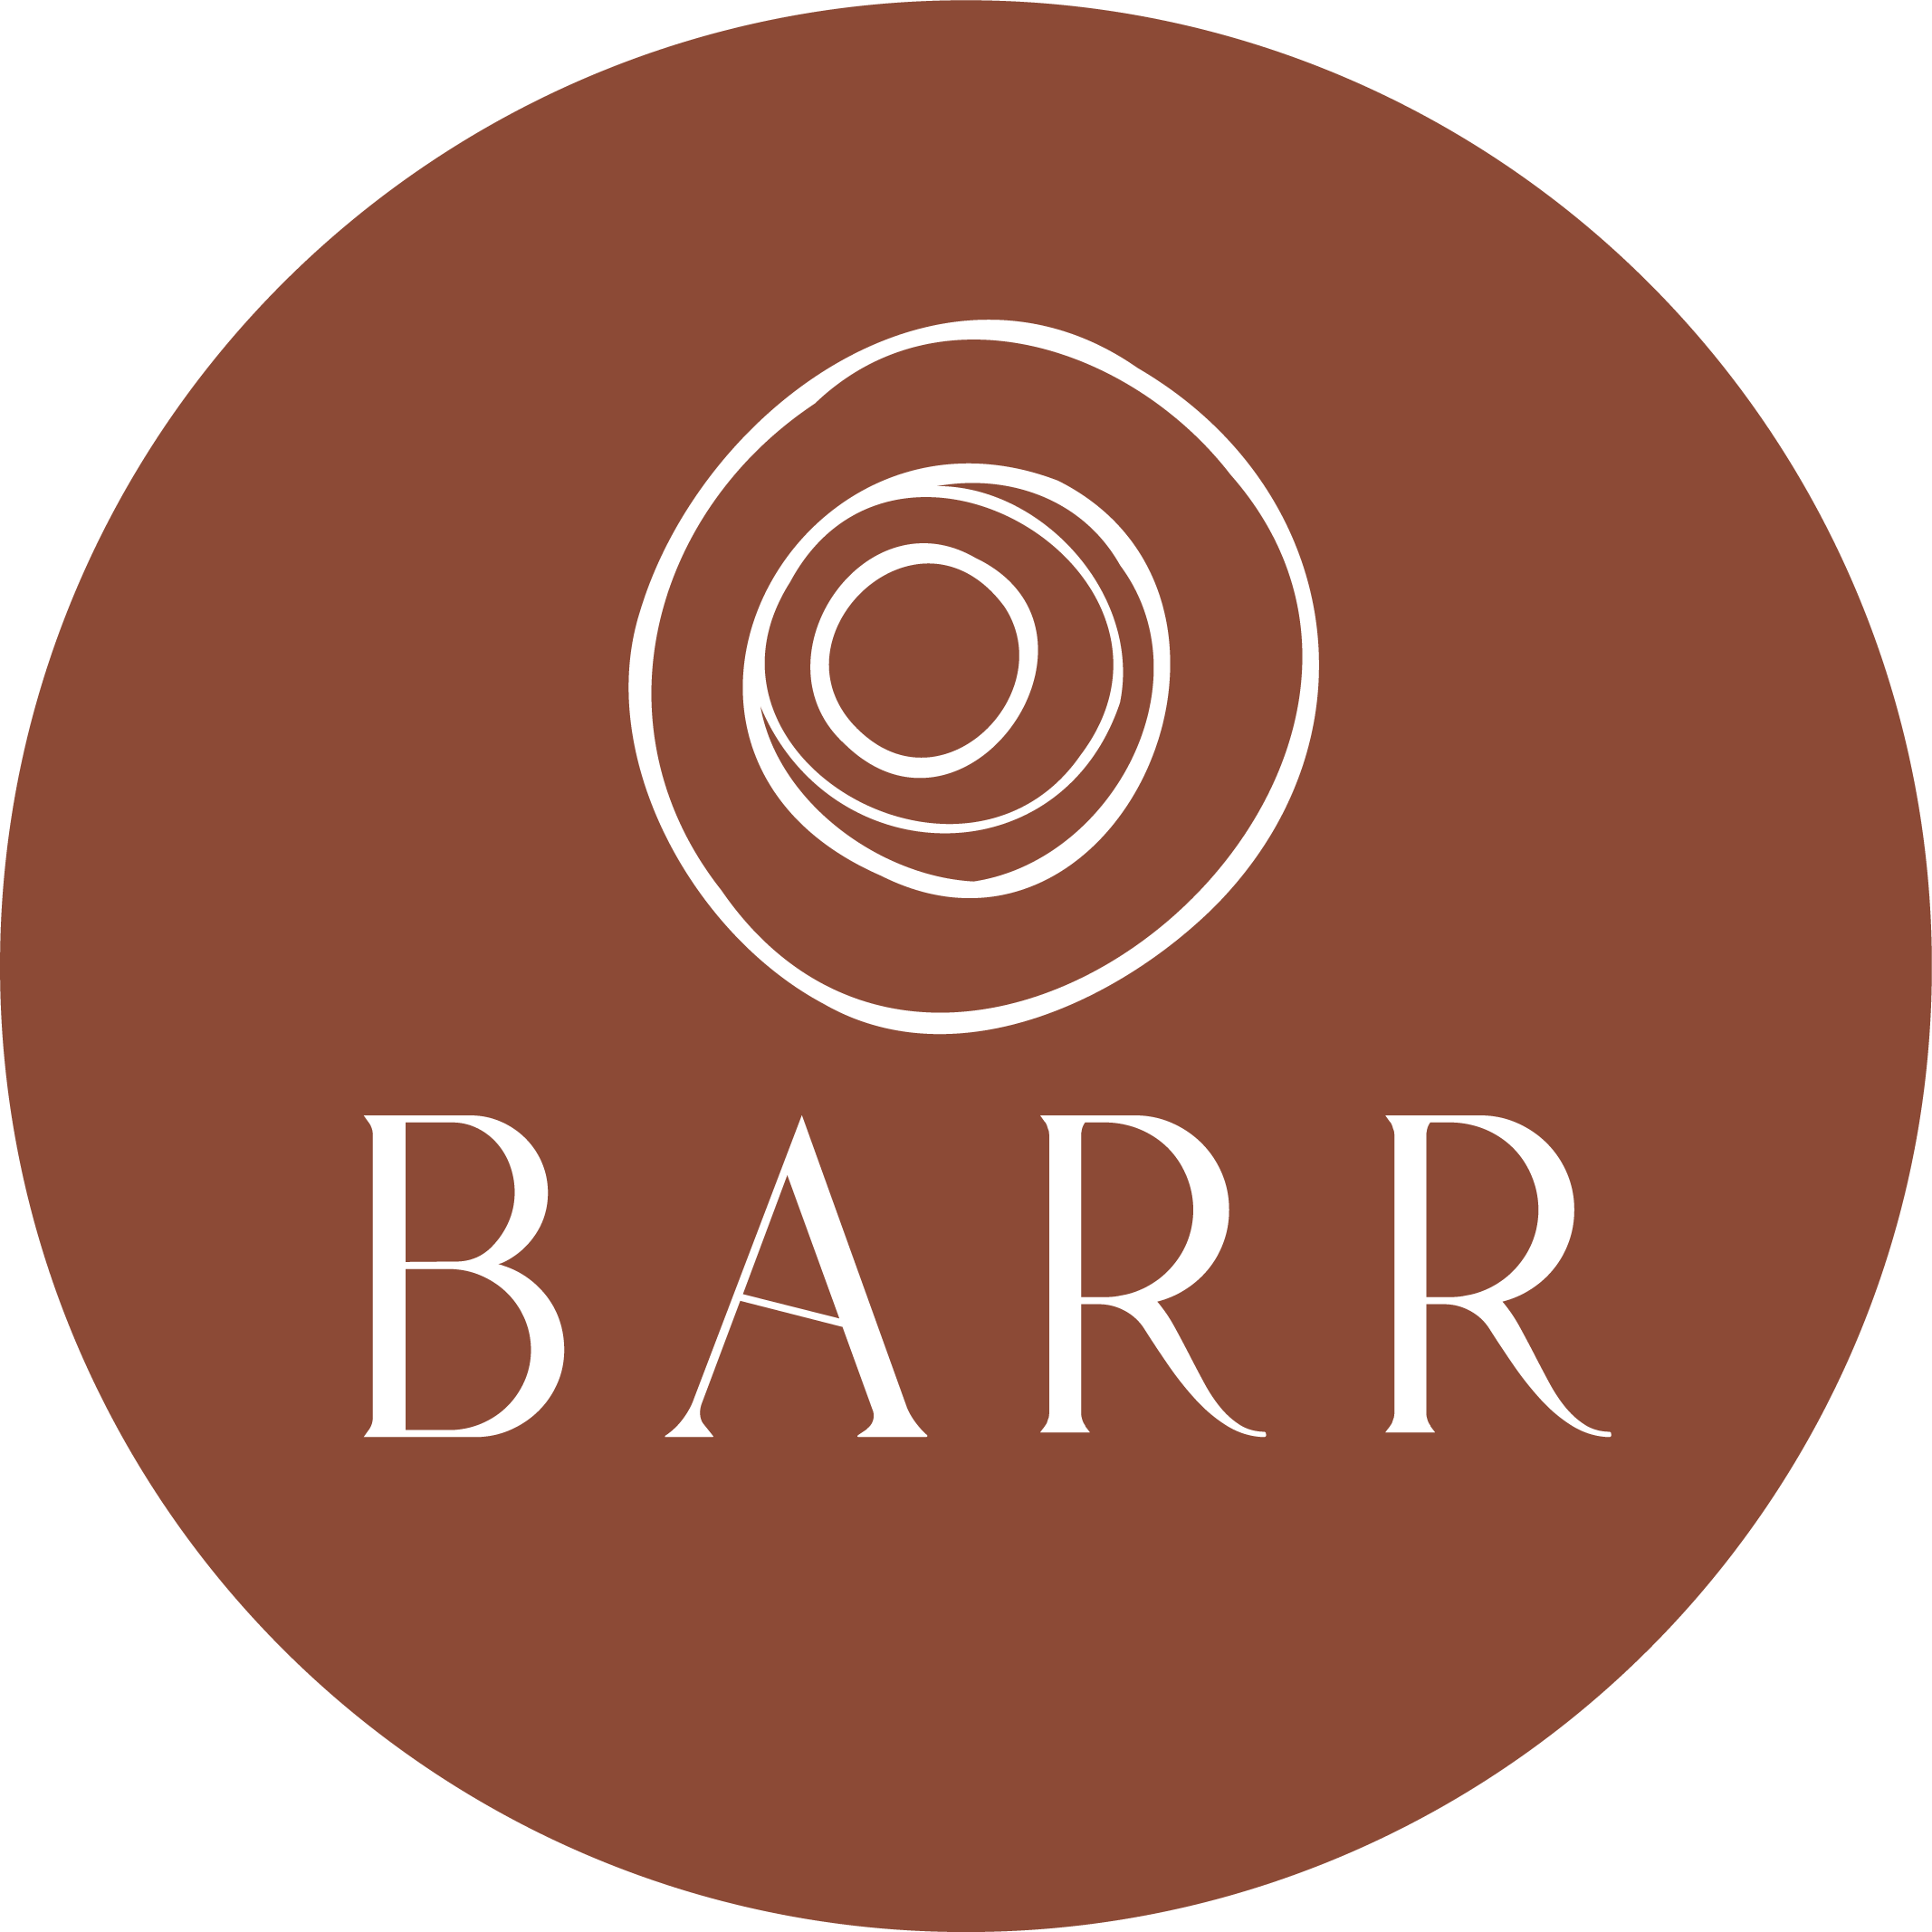 Barr-Mark-white-rust-round.png